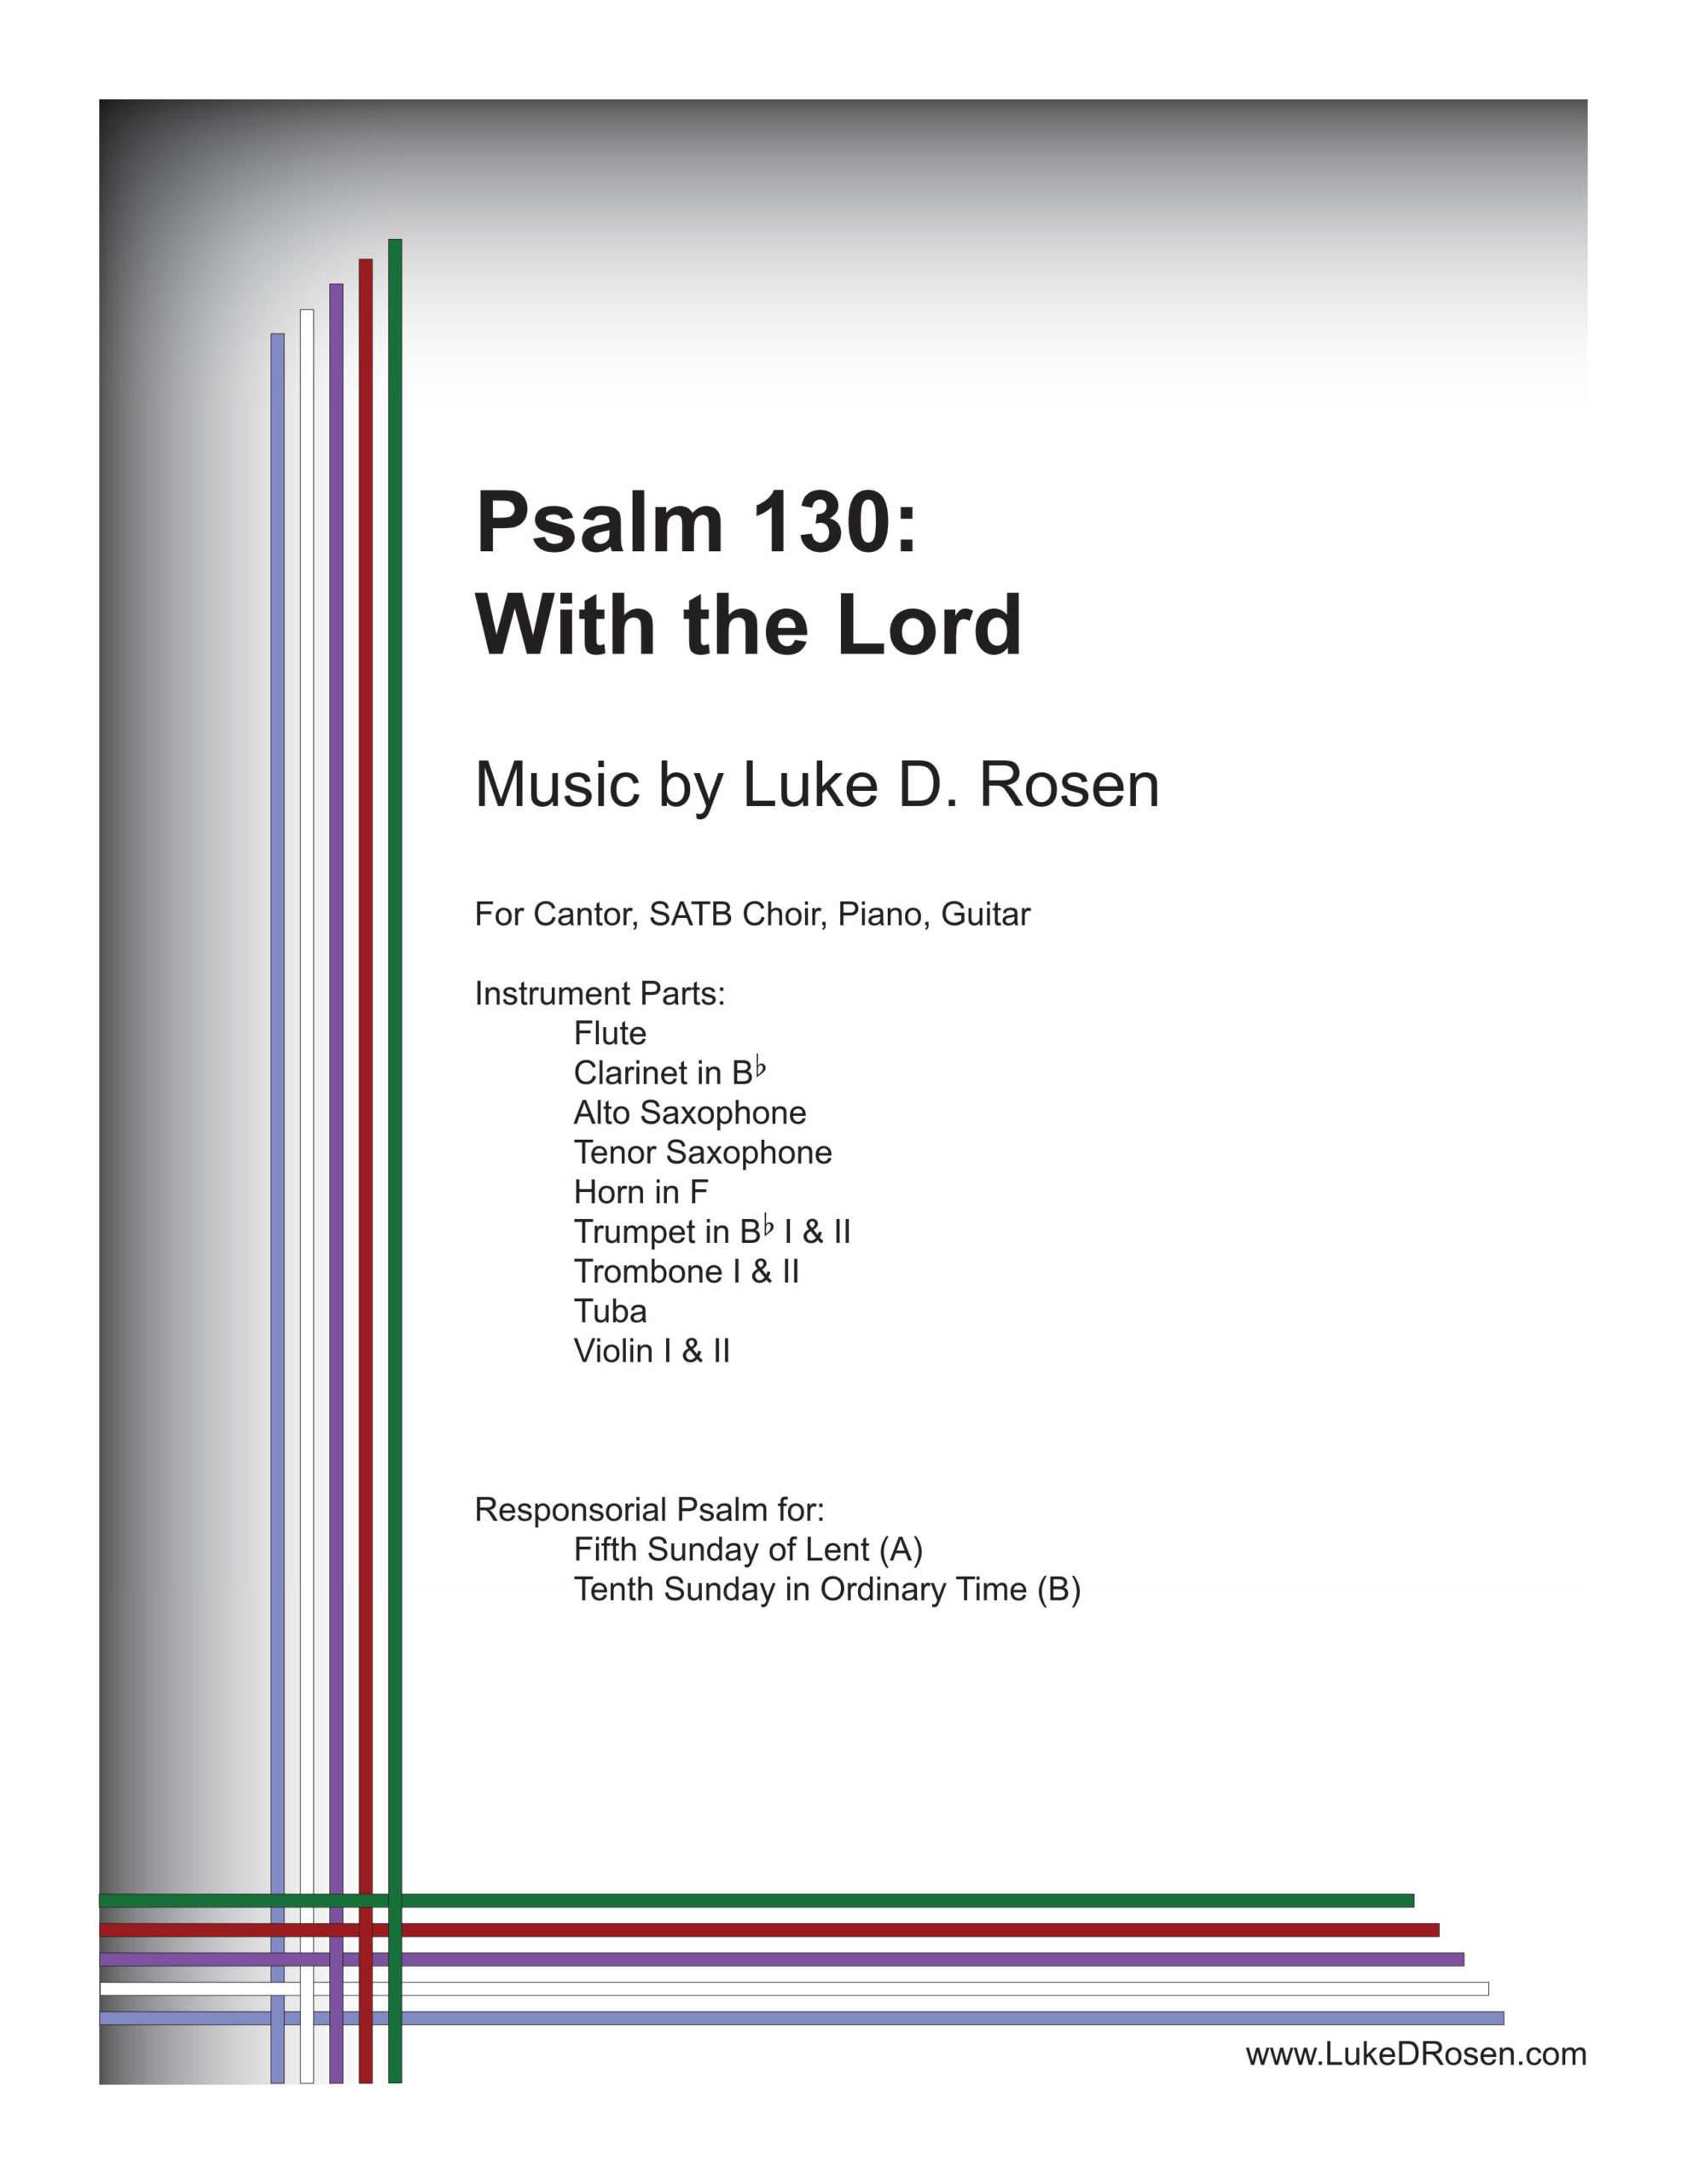 Psalm 130 – With the Lord (Rosen)